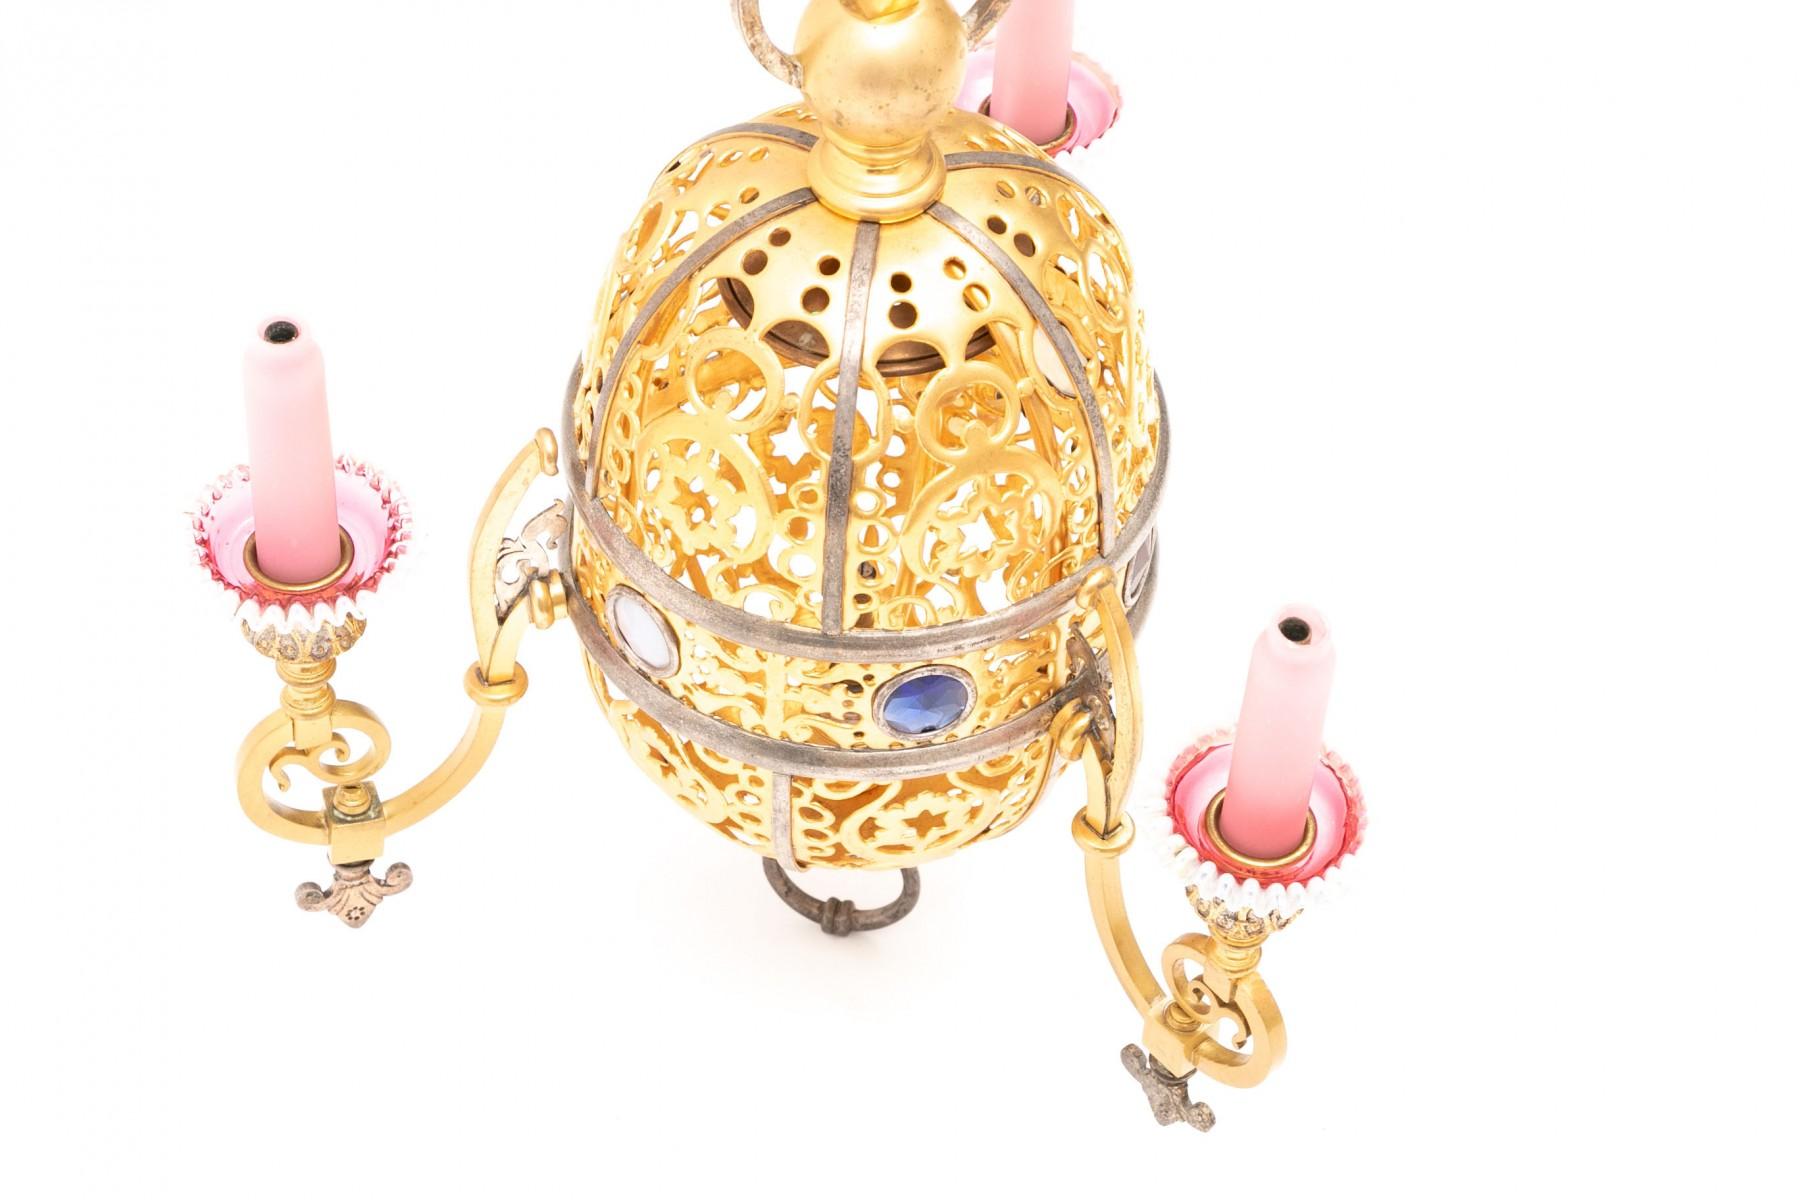 Turkish style gilt hanging lamp with inlaid glass jewels, pink glass candle covers and pink/white glass drip pans.  Designed for gas light with three candle arms and a single interior light and with its original gas hardware.  Conventional light